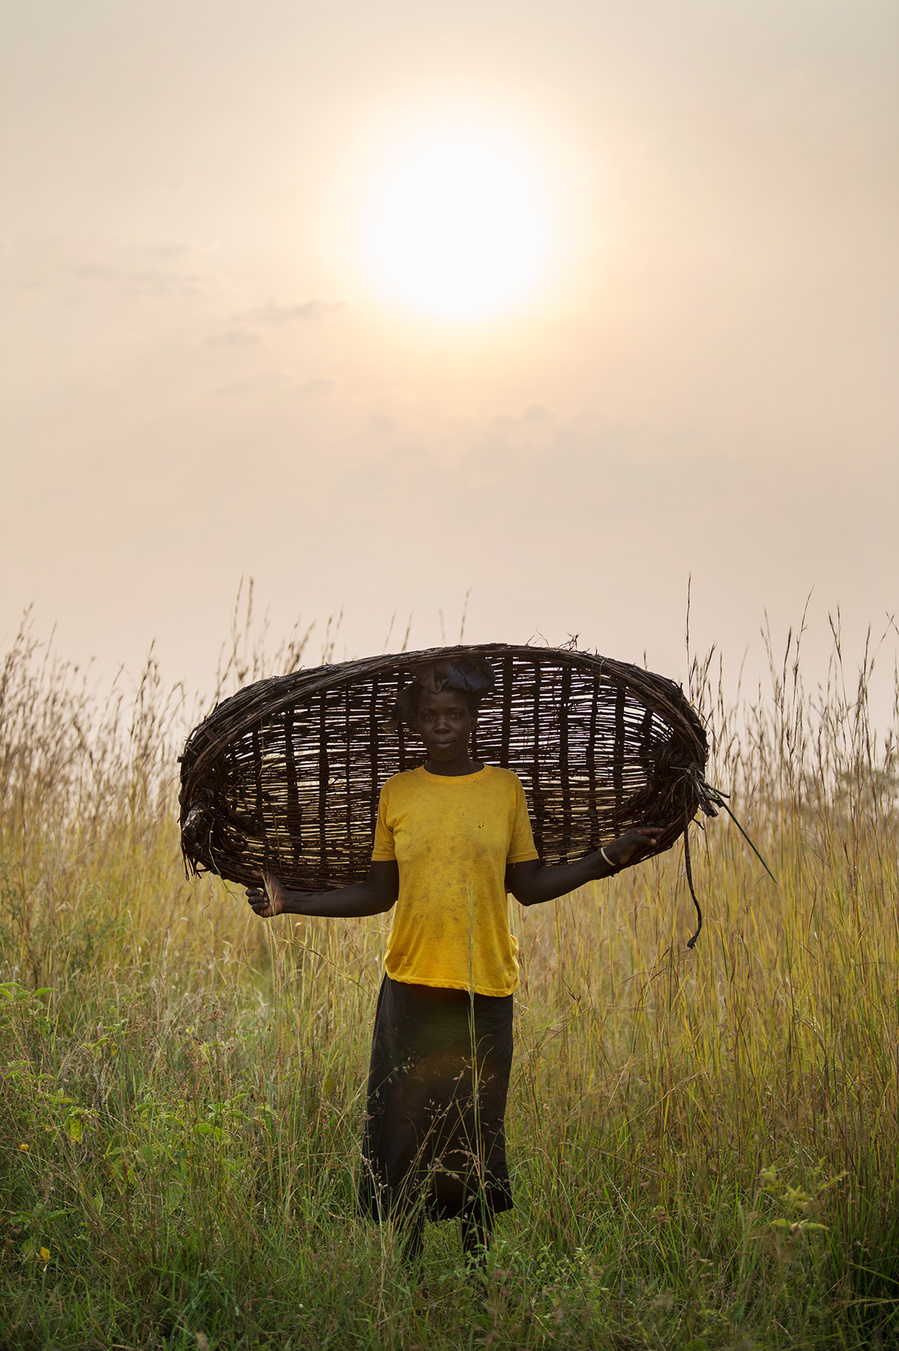 A fine art print of a woman walking through the grass with her fishing basket at sunset in Uganda, Africa.